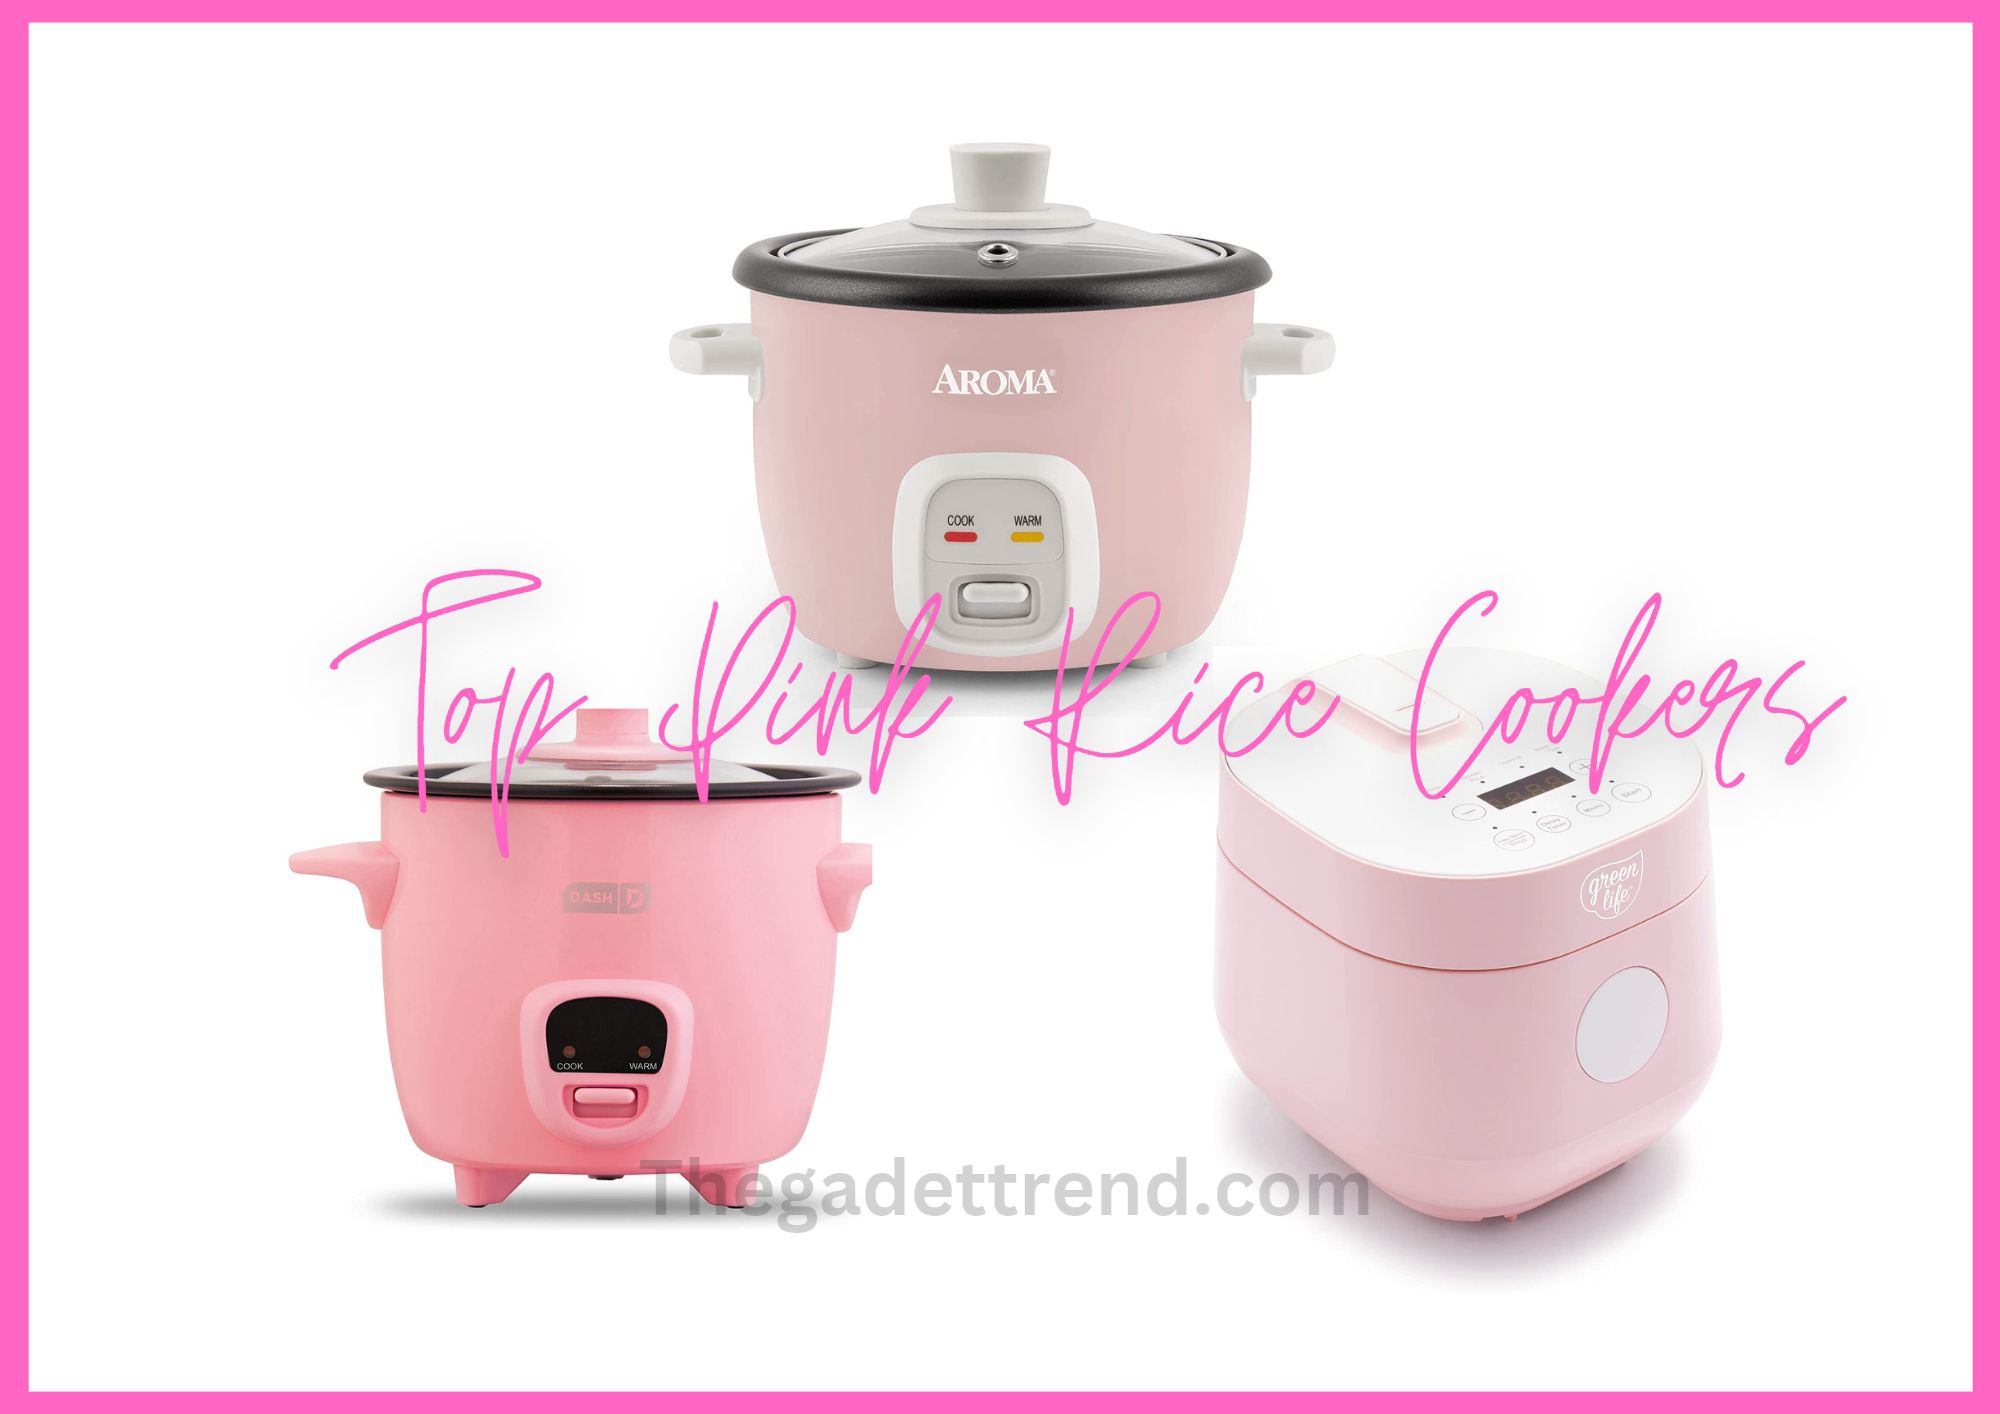 Pink Rice Cooker